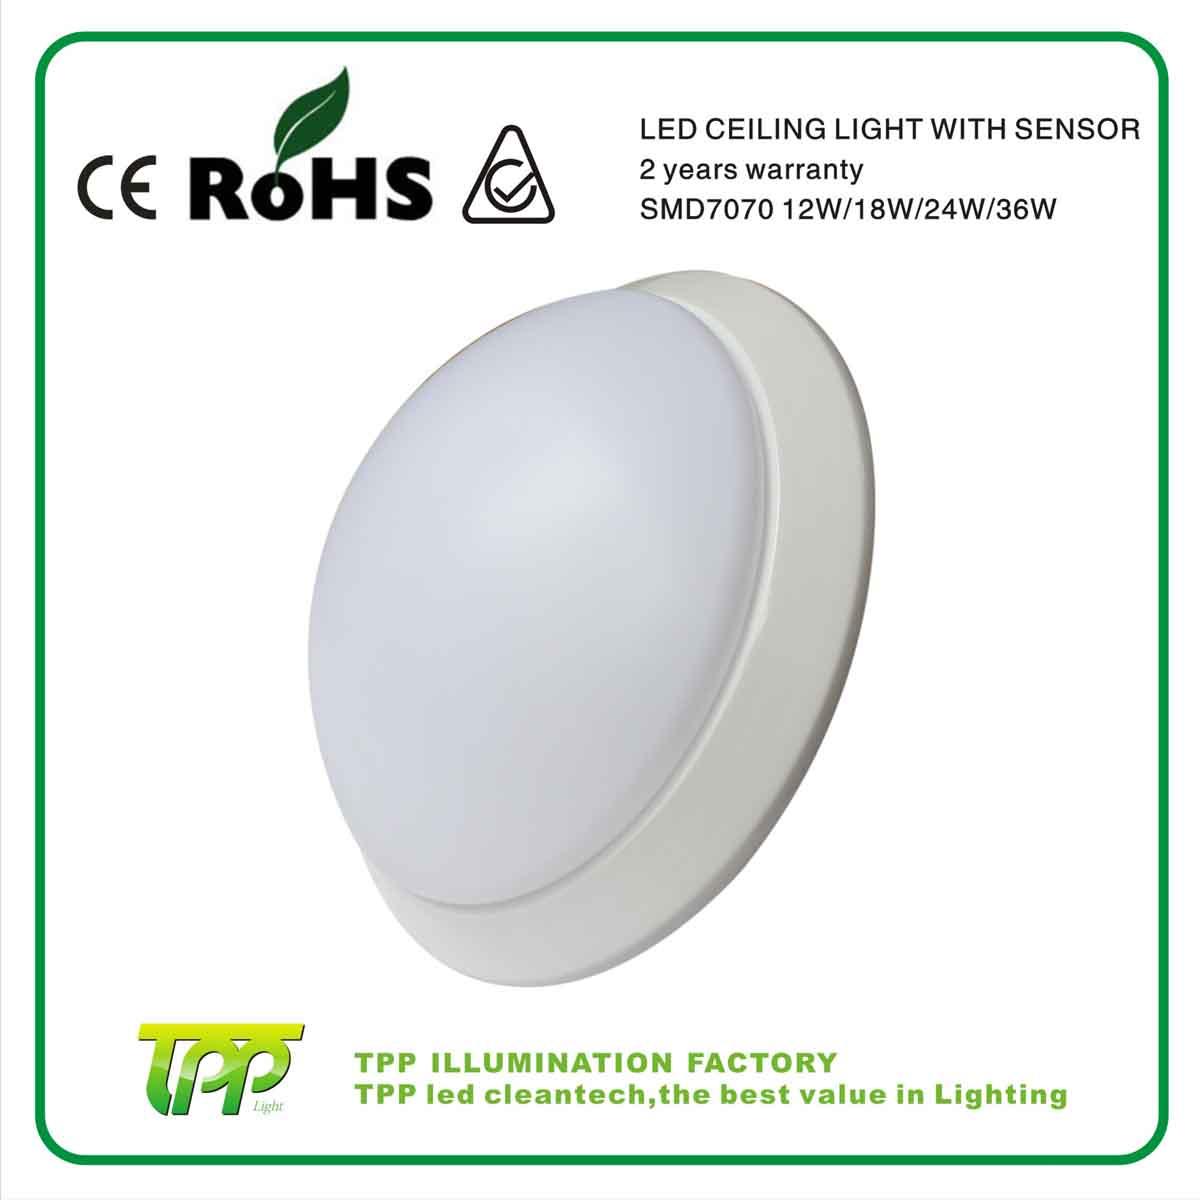 2013 high quality 24W SMD7070 Round plastic ceiling light cevers with Microwave Sensor